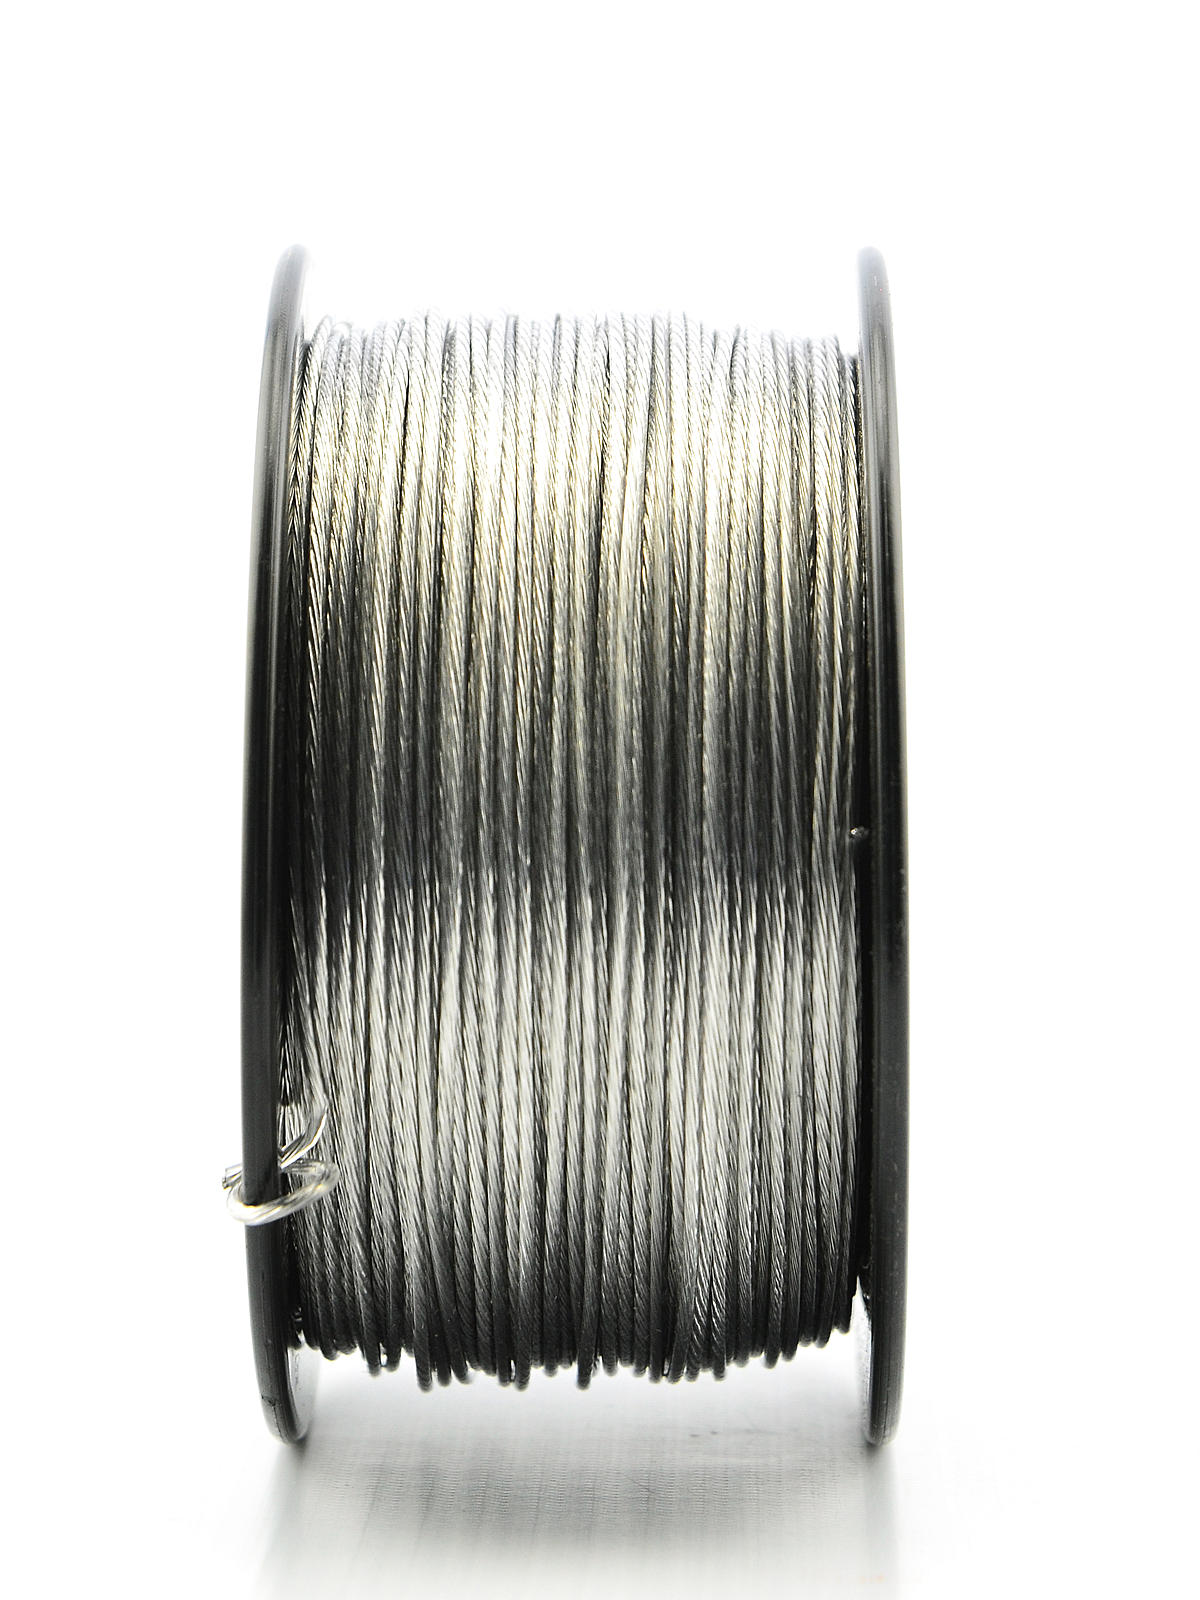 Braided Picture Wire 35 Lbs. 20 Strand 5 Lb. Spool